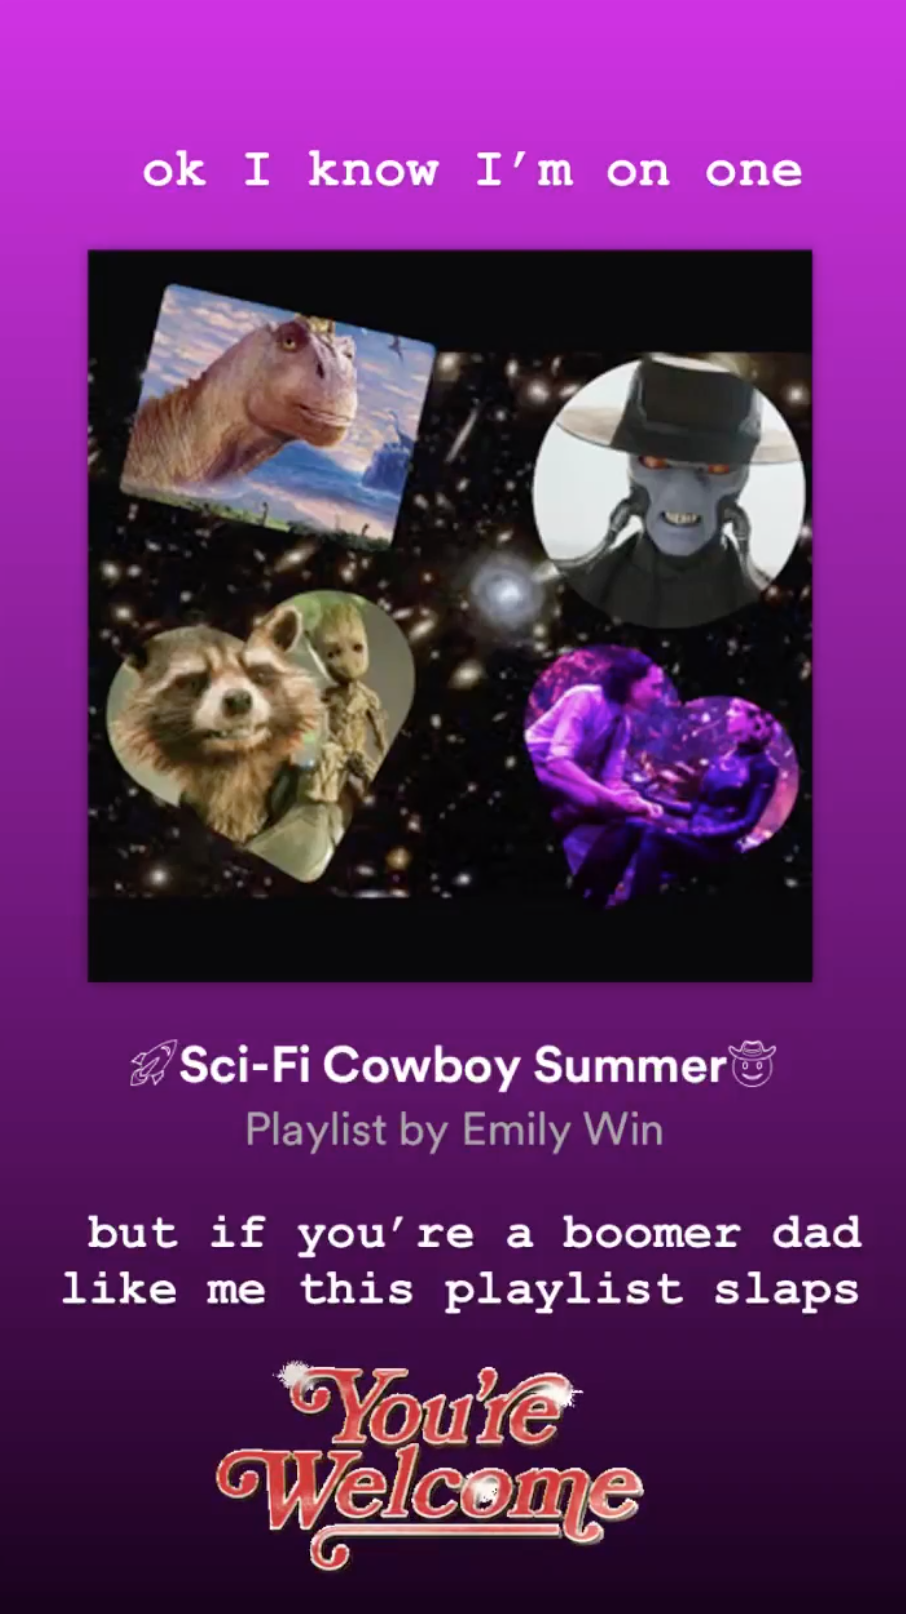 A screenshot of Em Win's Instagram story reading Sci-Fi Cowboy Summer Playlist by Emily Win. Text reads "ok I know I'm on one but if you're a boomer daad like me this playlist slaps"